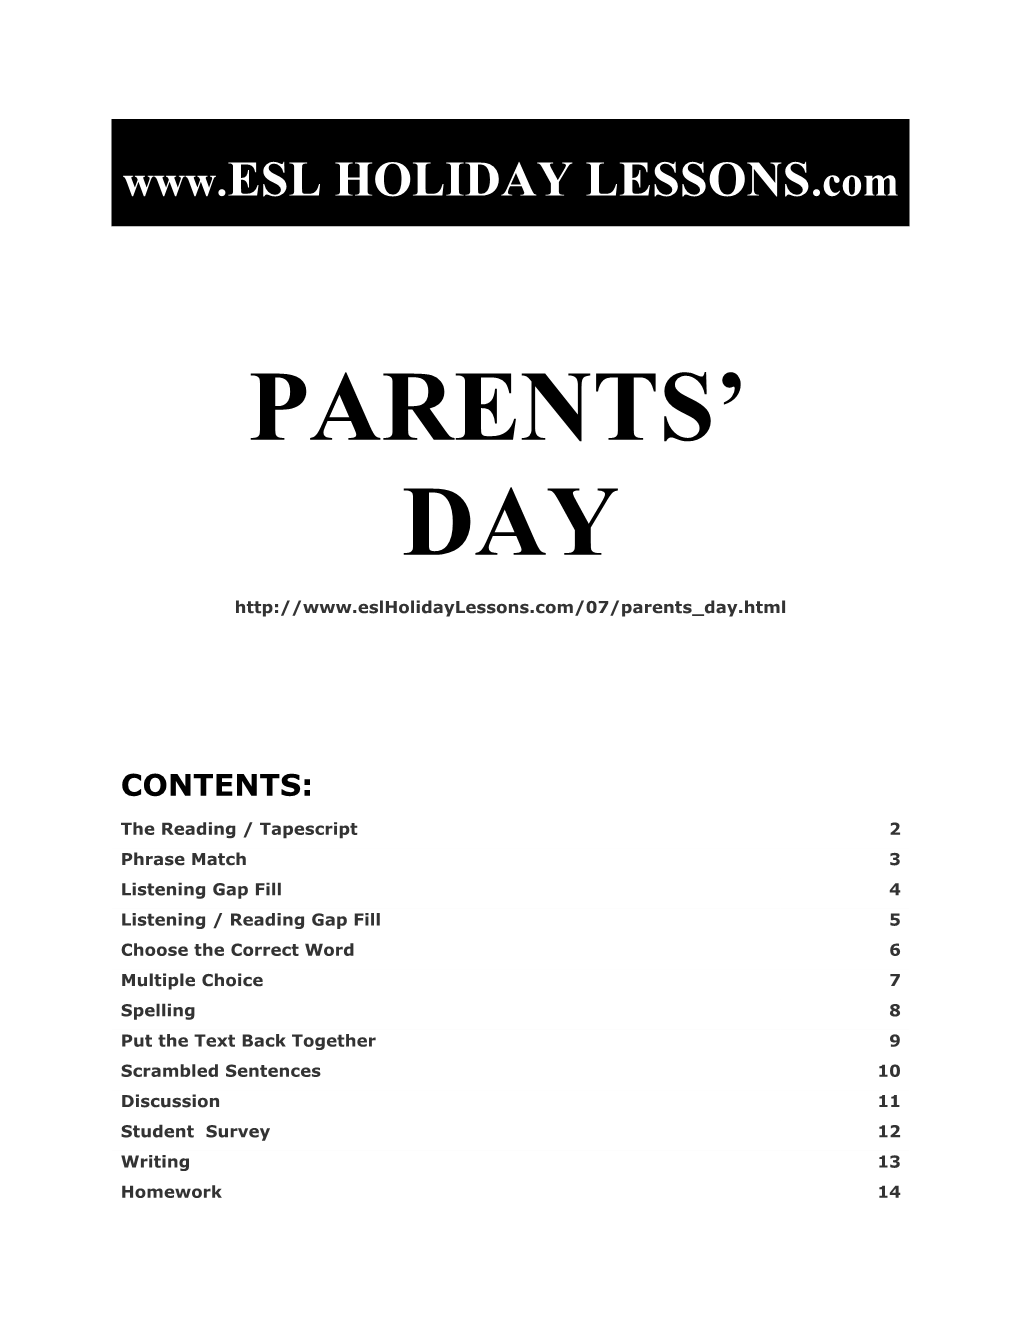 Holiday Lessons - Parents' Day